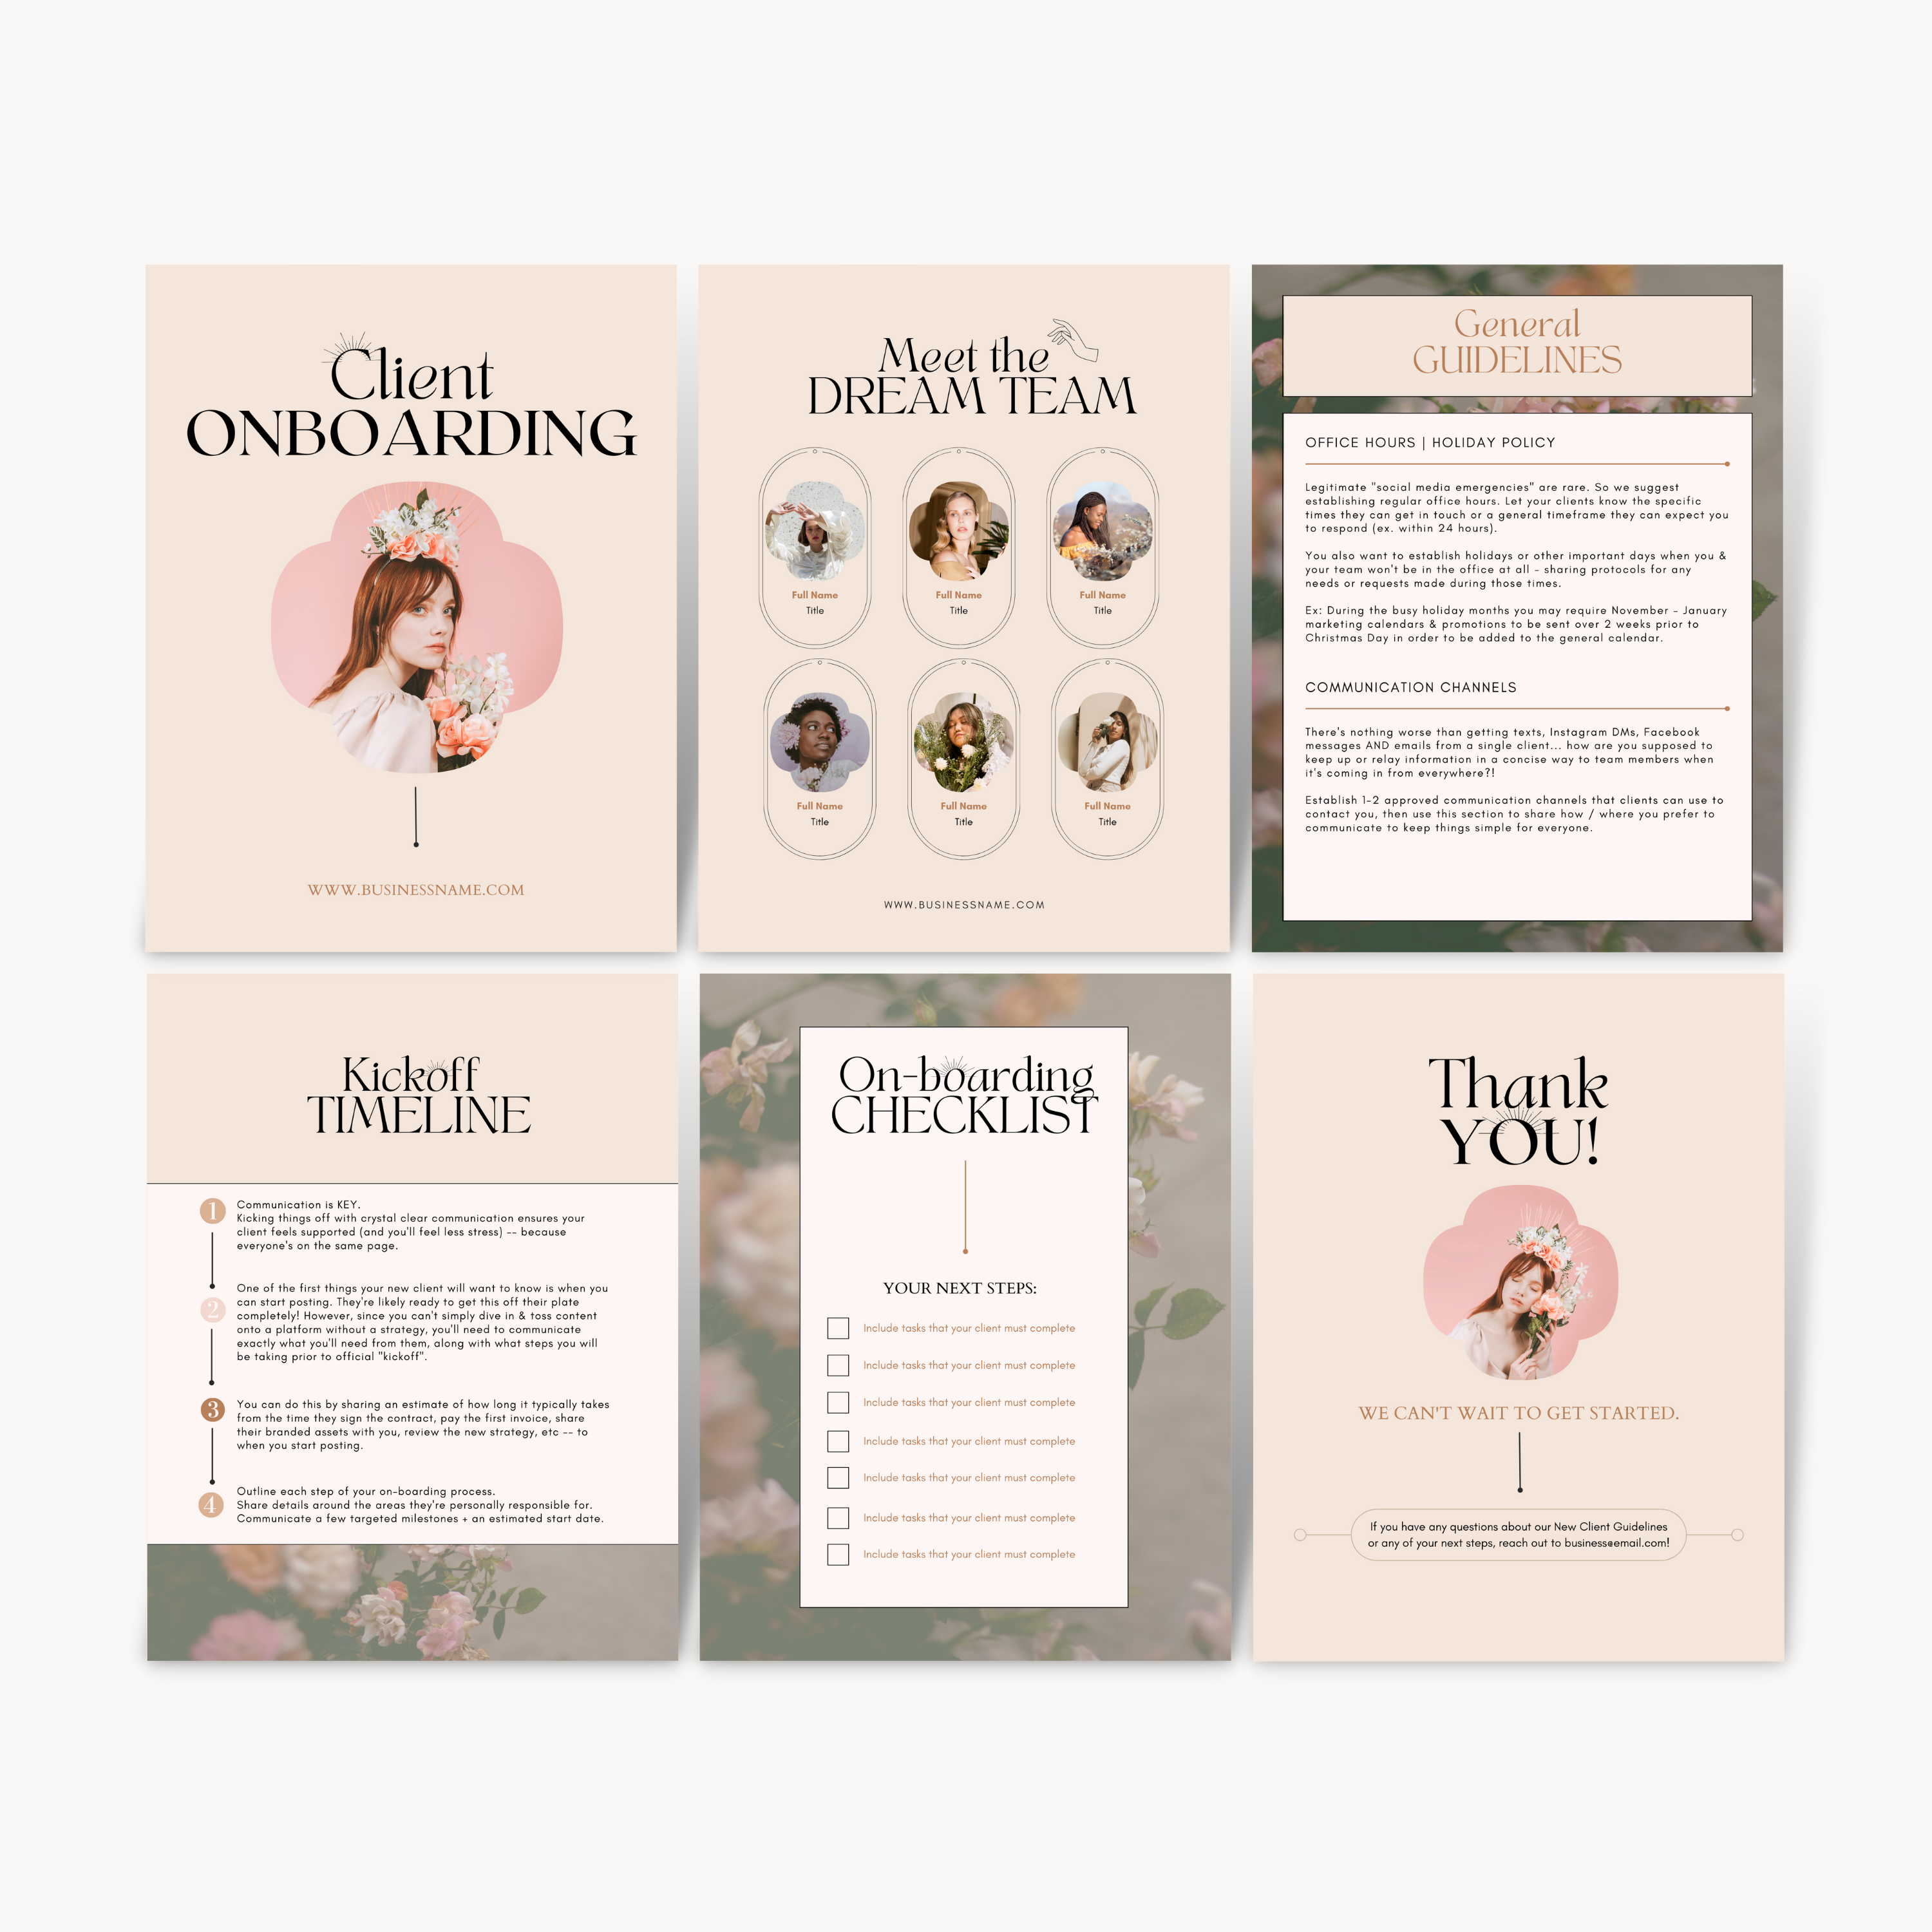 Client Onboarding Template - Delicate & Dreamy